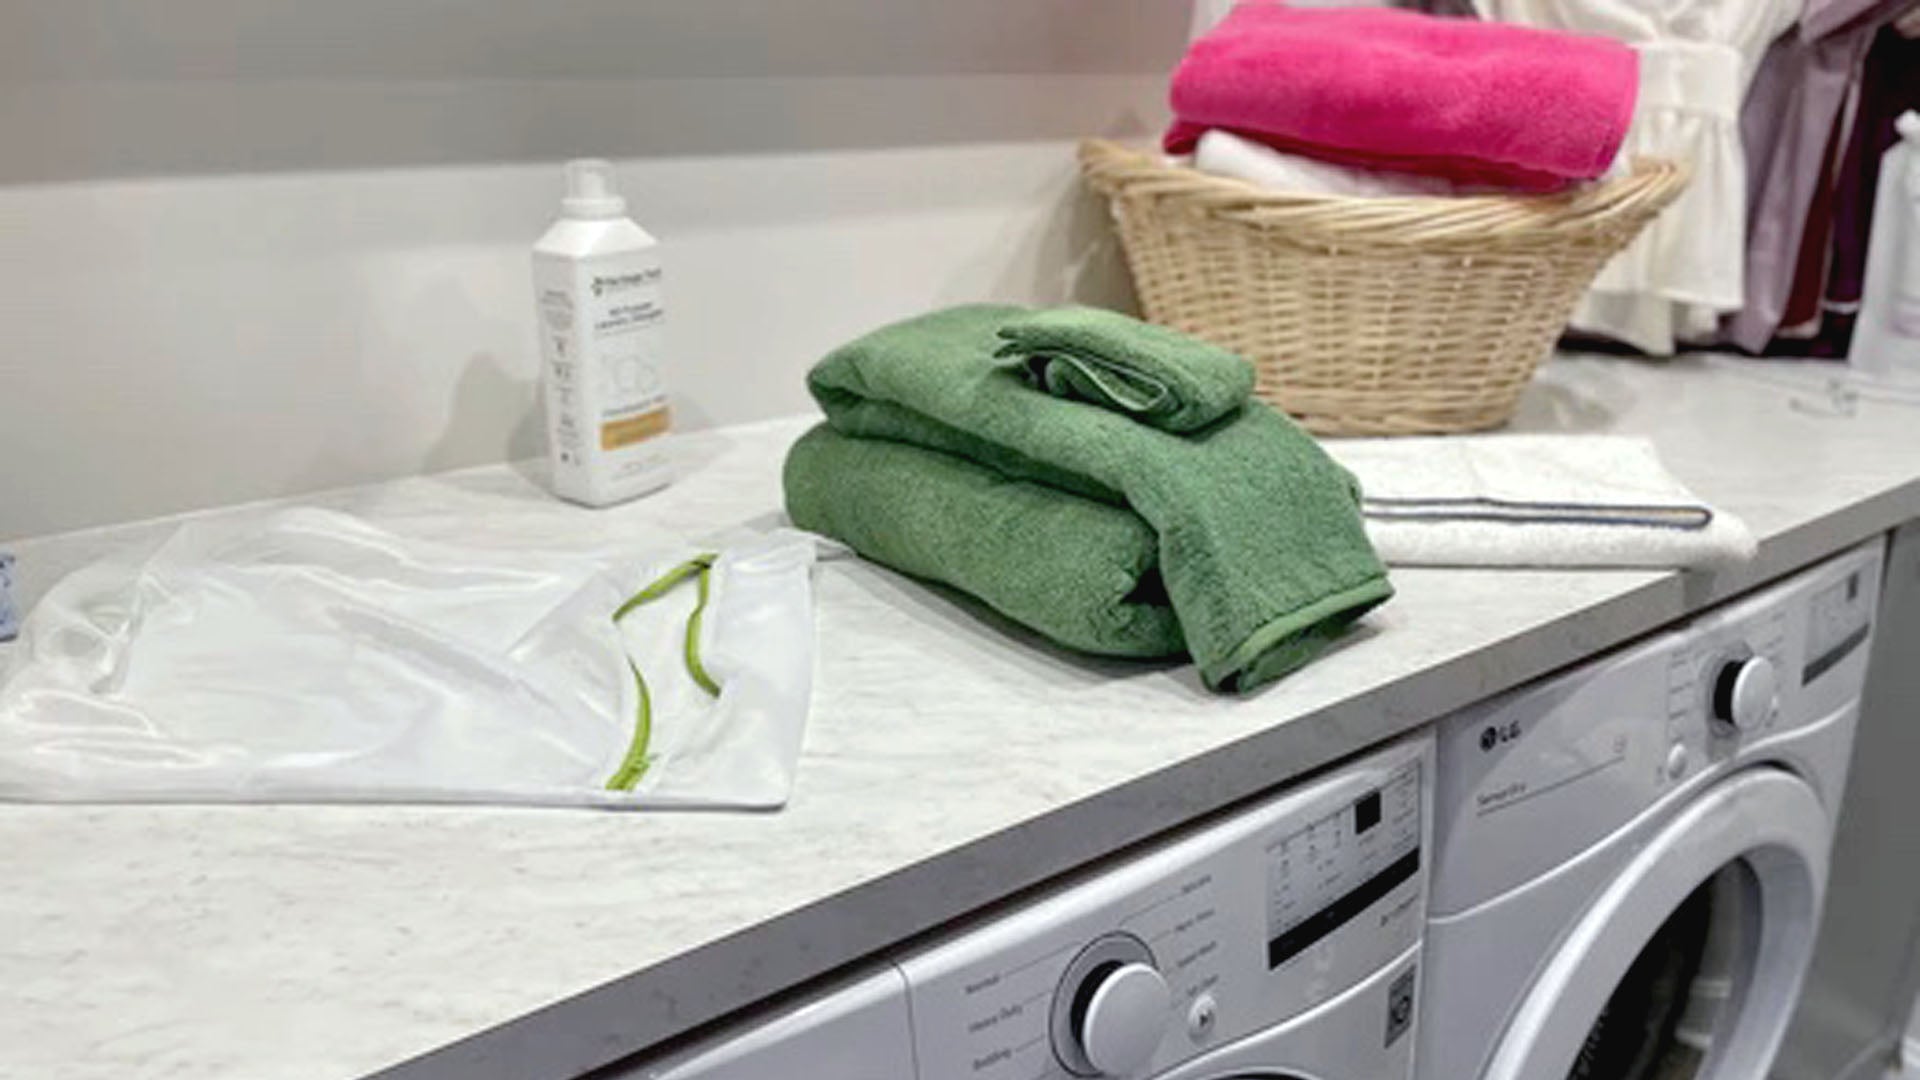 How to Care for Matouk Fine Linens and Towels on Washing Machine